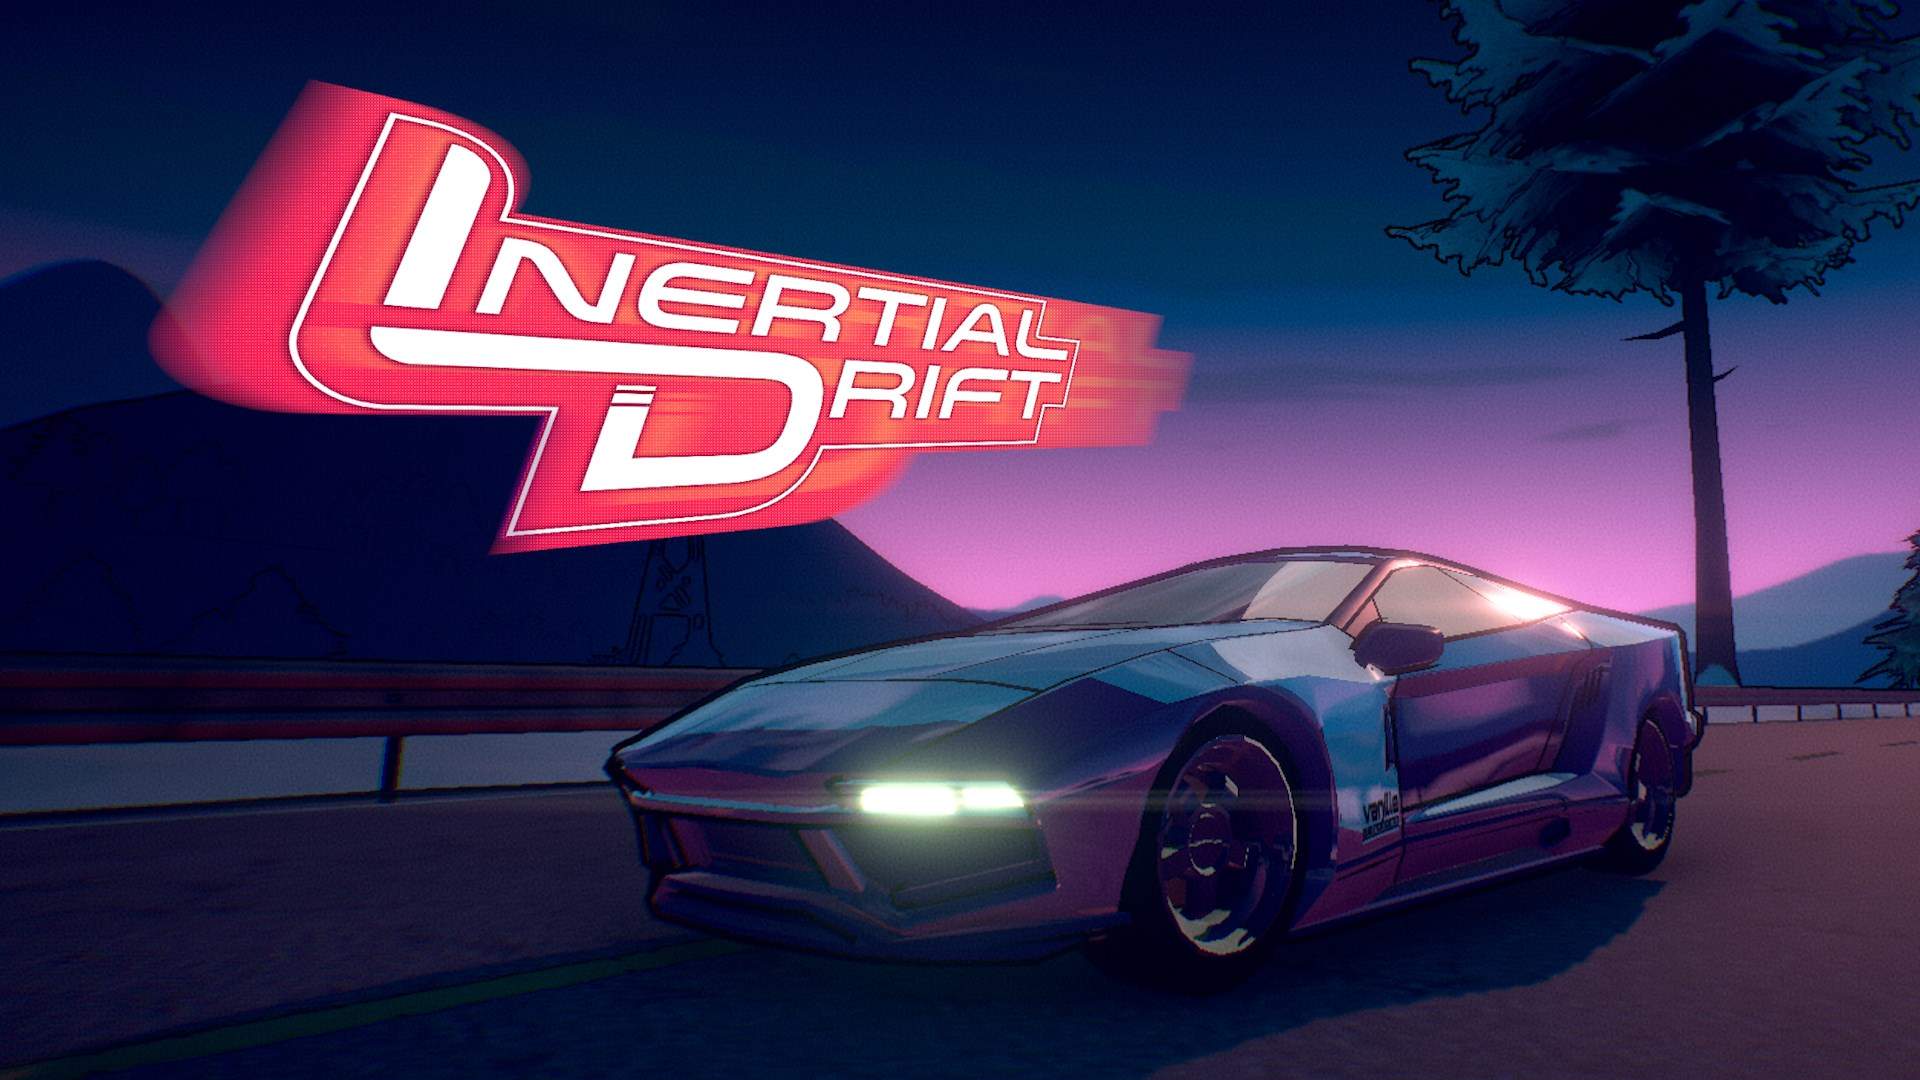 Inertial Drift Is Now Available For Xbox One's Major Nelson